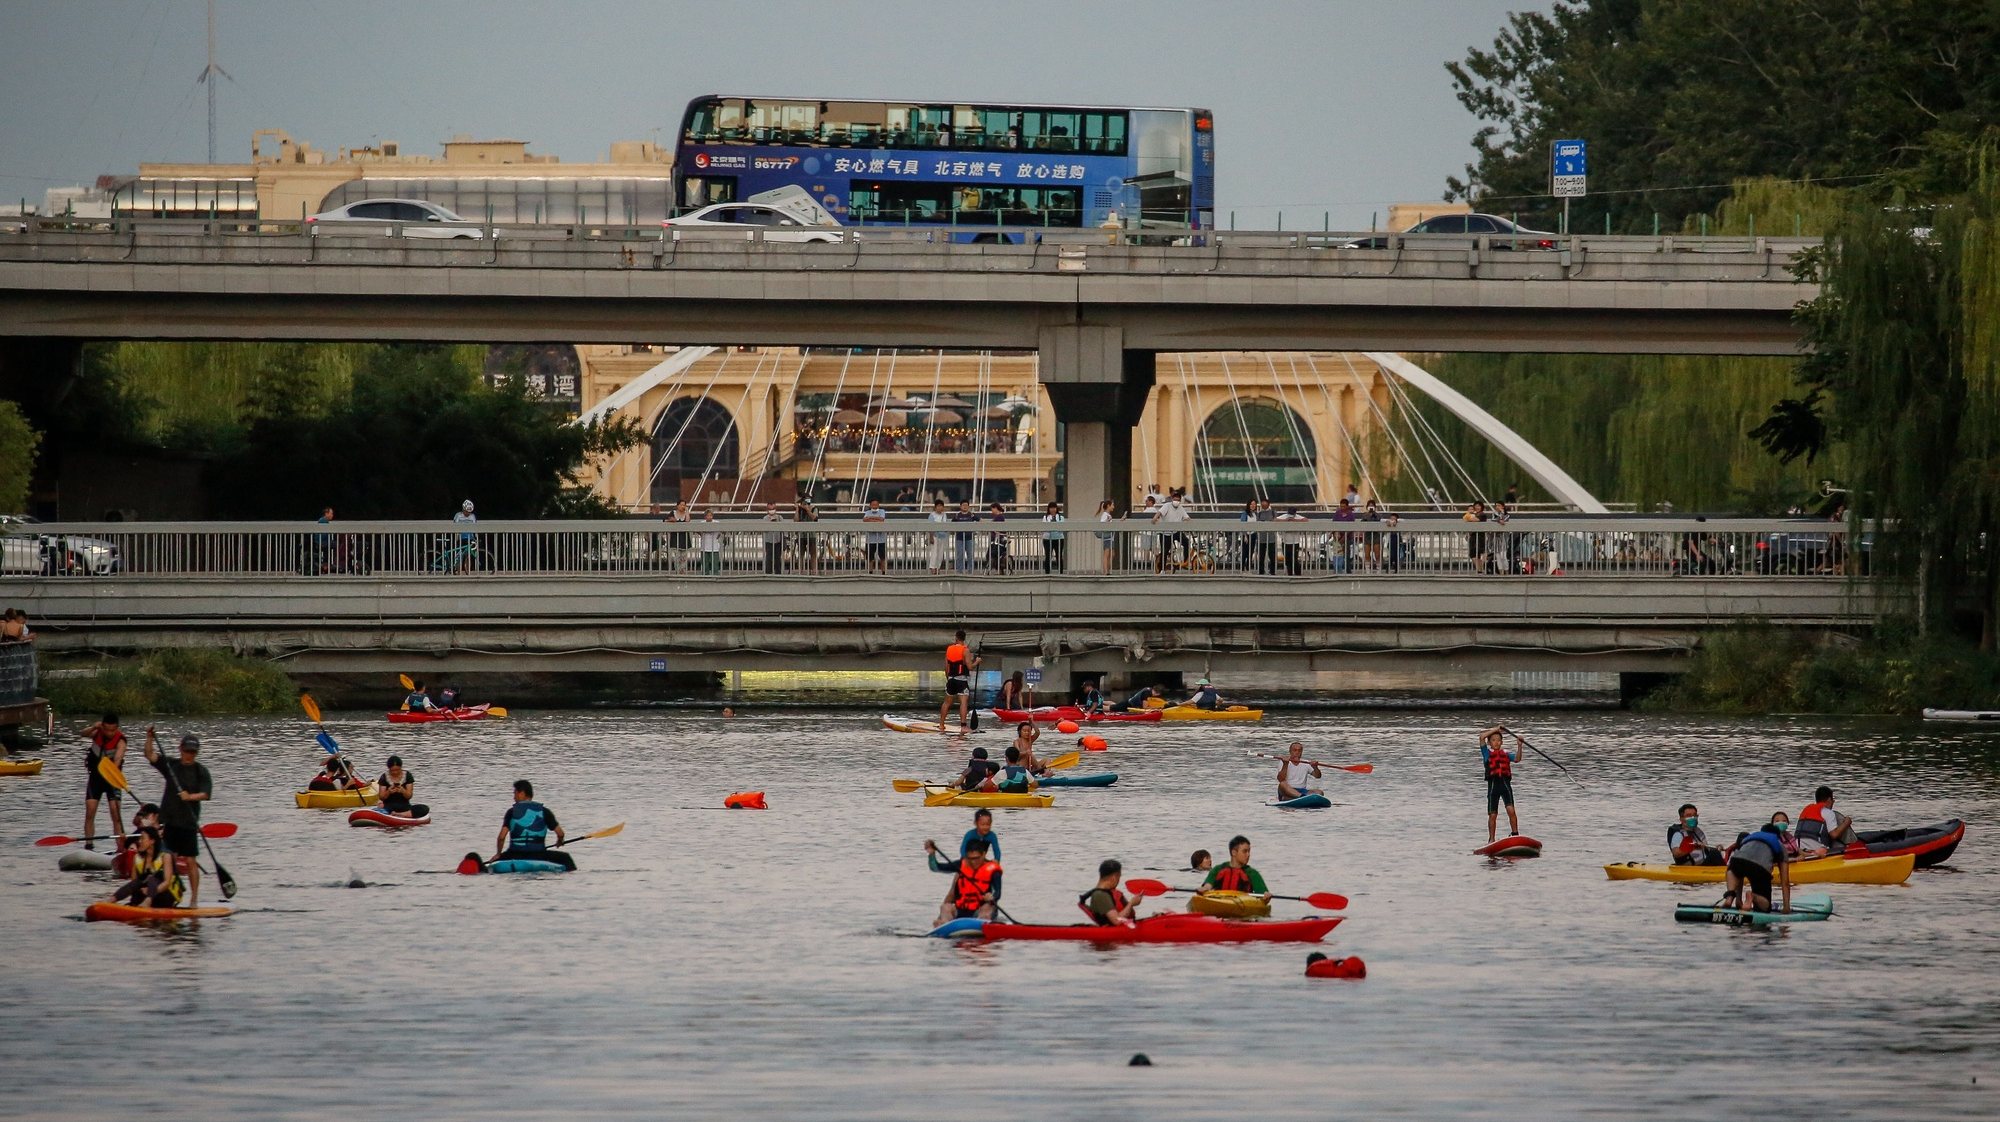 epa10191578 People ride paddle boards and kayaks at the Liangma river in Beijing, China, 18 September 2022. After more than two weeks in lockdown, local authorities announced relaxing of curbs starting 19 September in Chengdu, southwestern China.  EPA/MARK R. CRISTINO